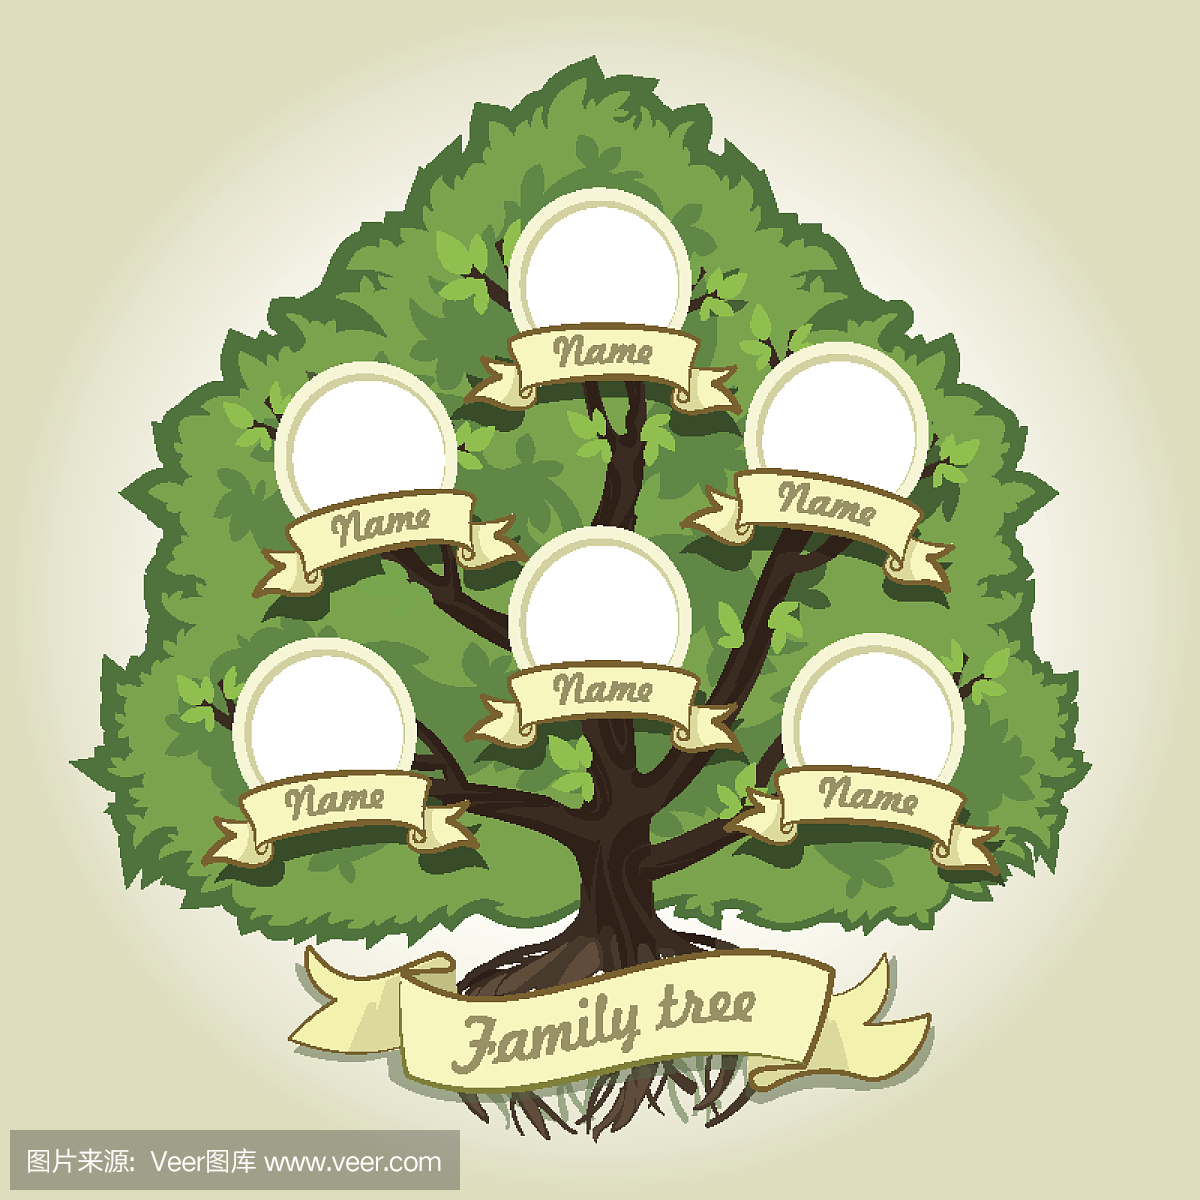 Genealogical family tree on gray background. F